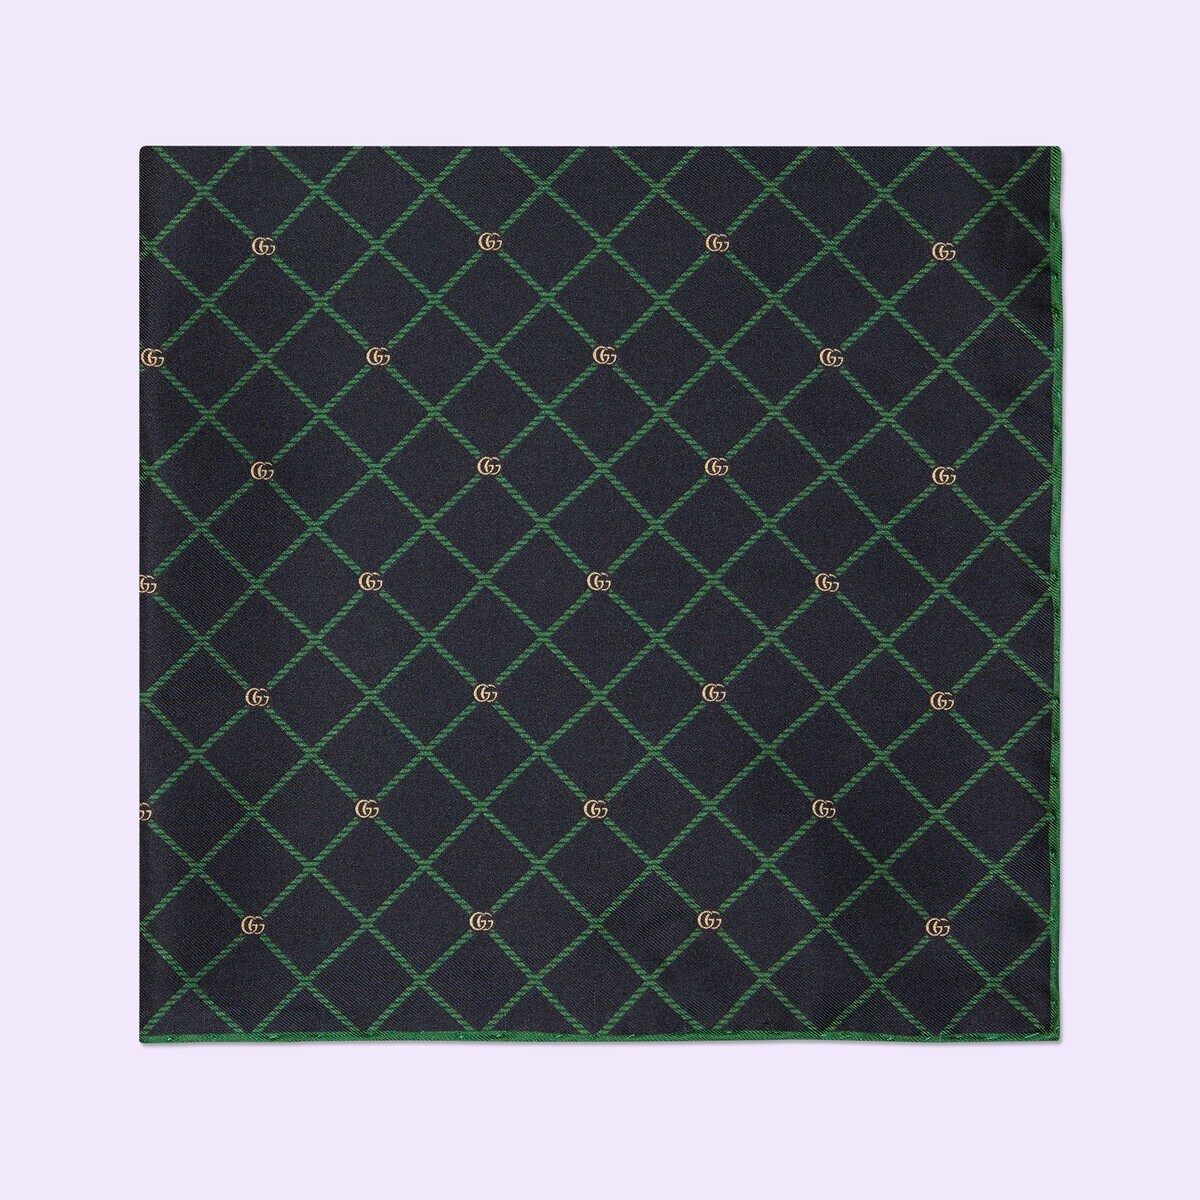 Double G and check silk pocket square - 2